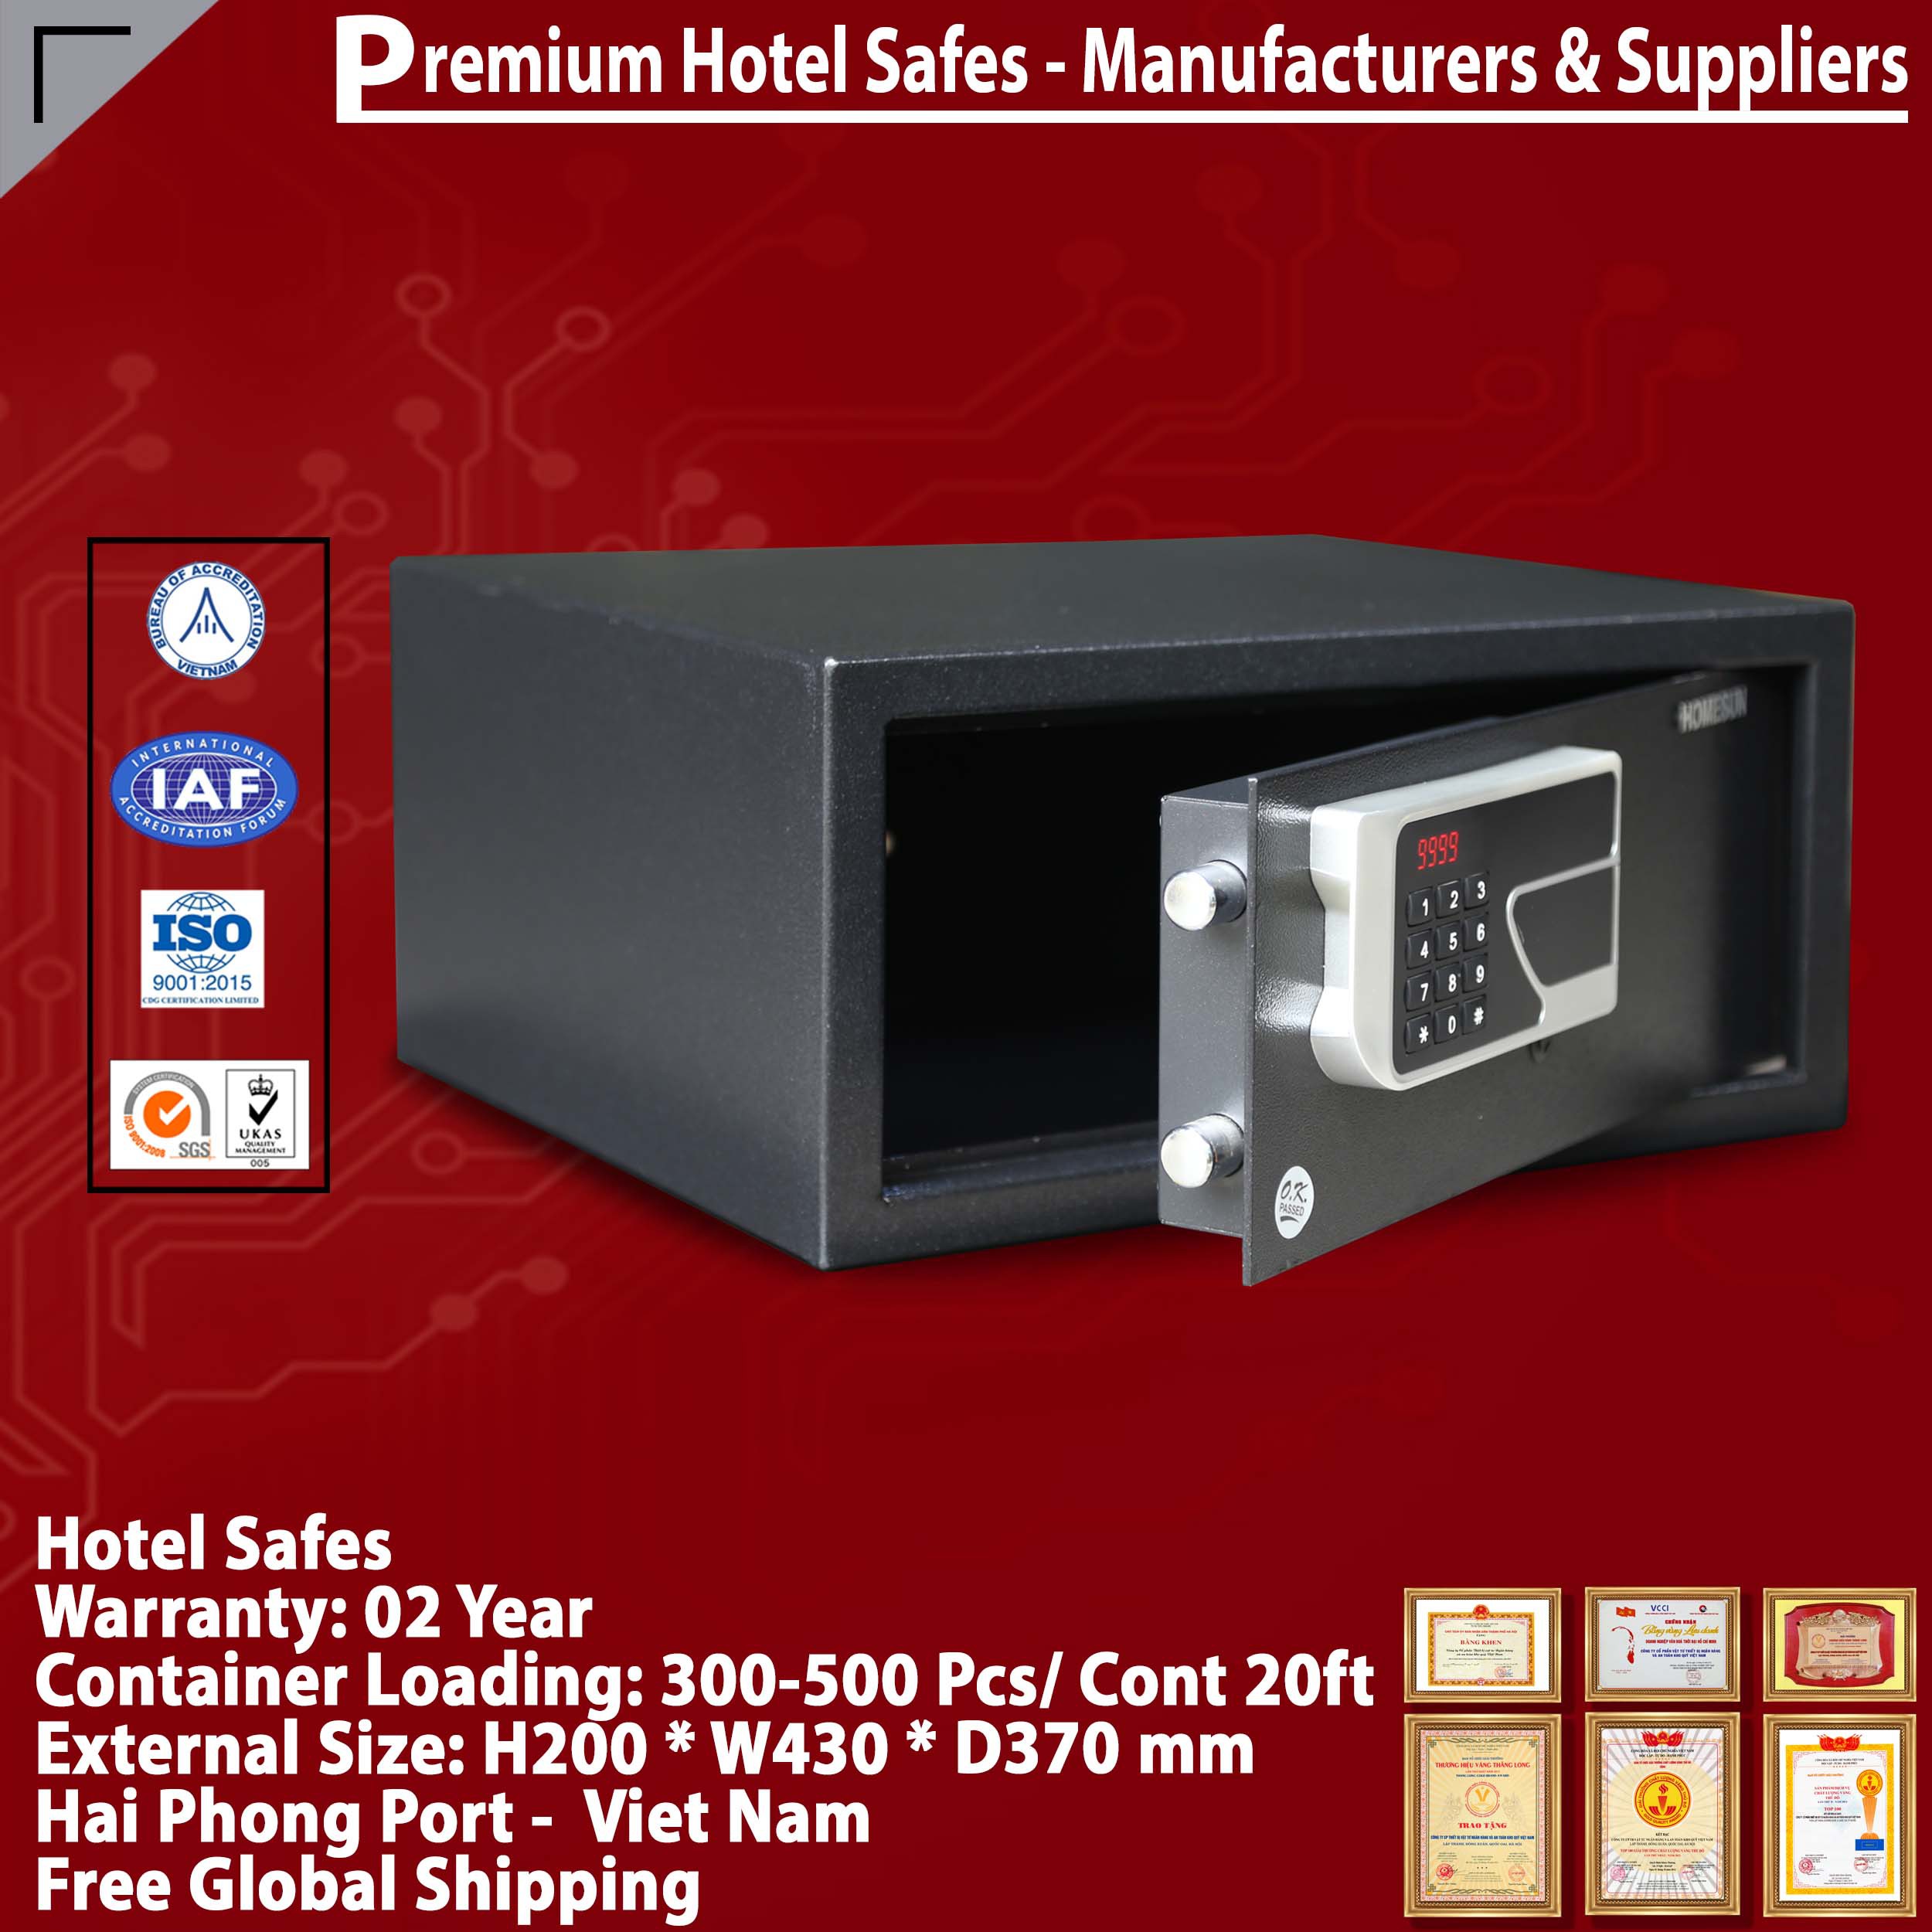 Safes in Hotel High Quality Price Ratio‎